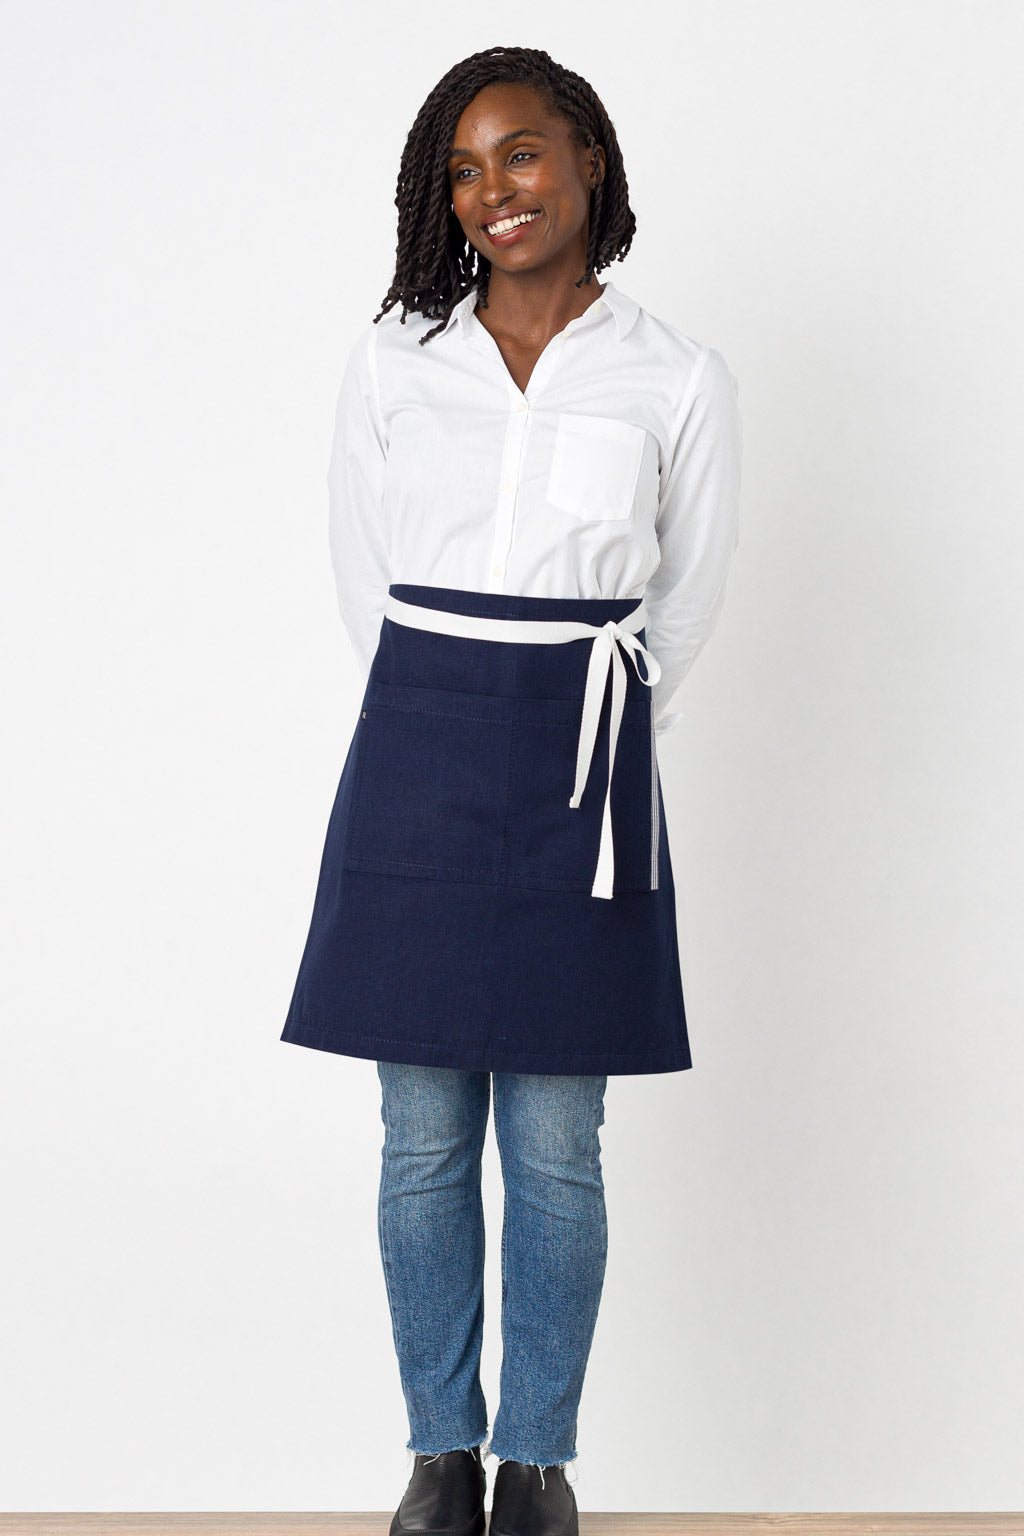 Bistro Middly Apron, 20"L, Navy with White Straps, Men and Women